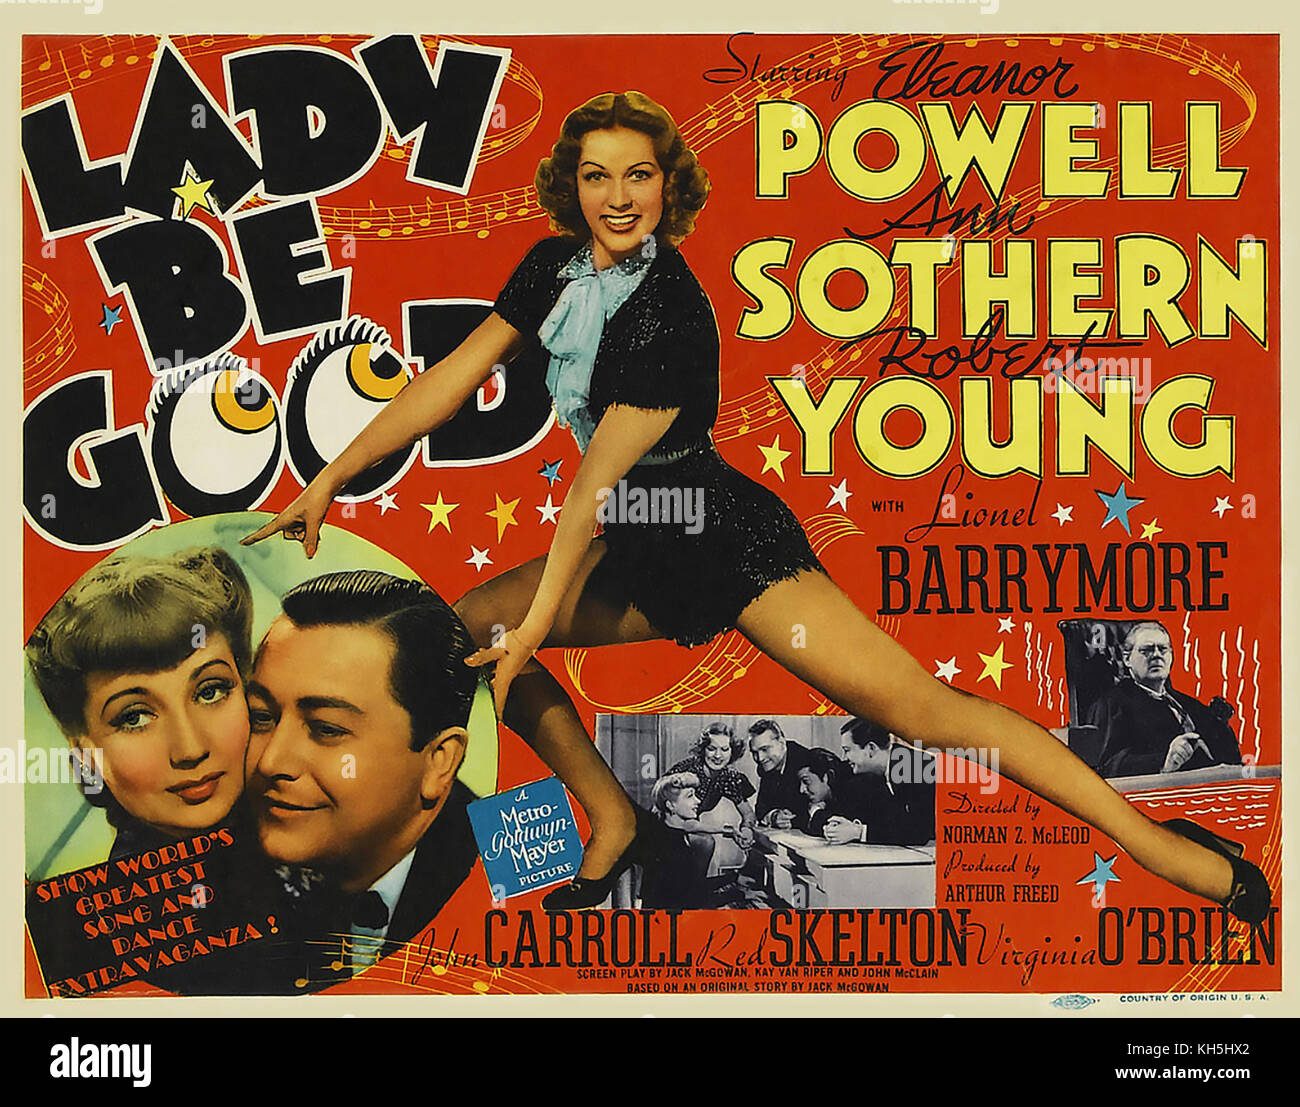 Lady BE GOOD 1941 Comedia musical MGM con Eleanor Powell, Ann Southern y Robert Young Foto de stock